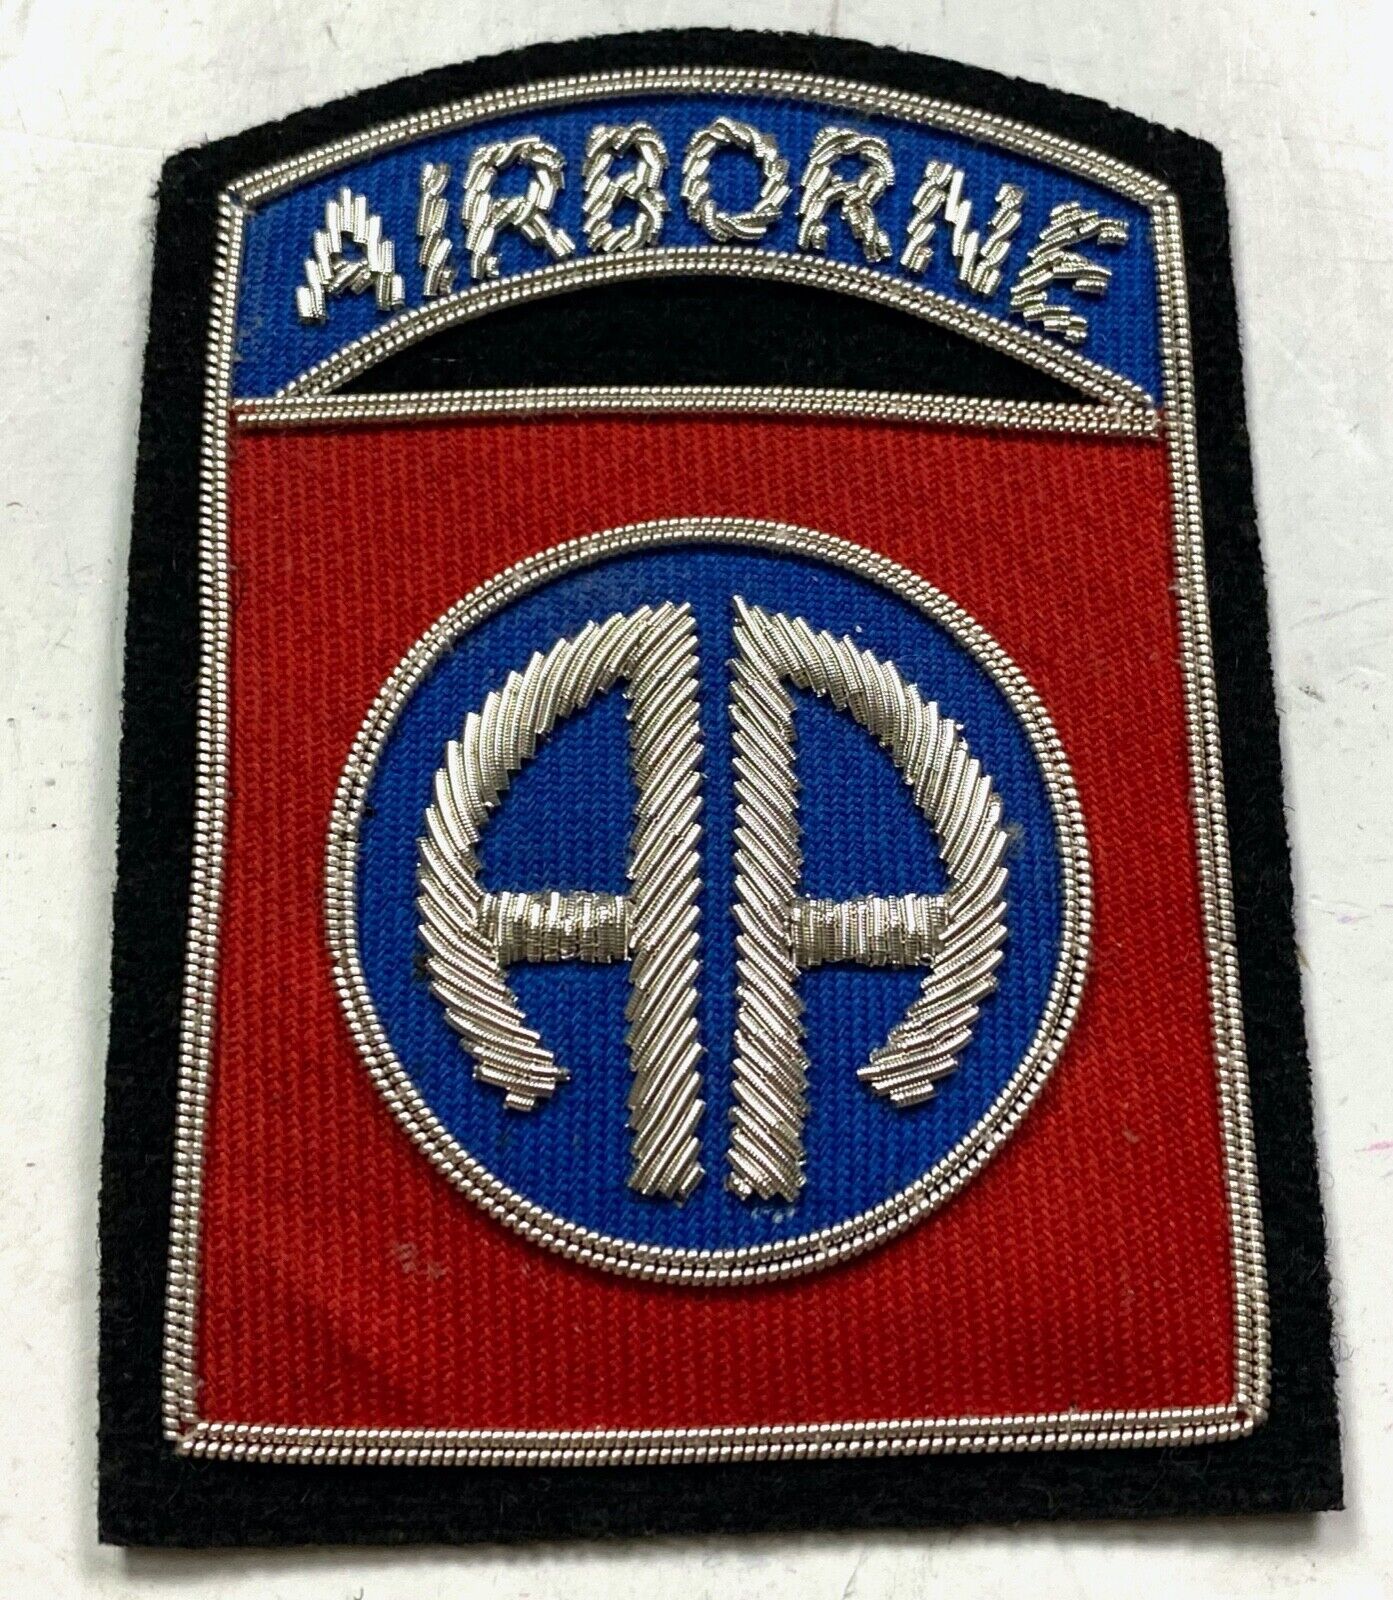  WWII 82ND AIRBORNE PARATROOPER CLASS A SLEEVE INSIGNIA PATCH- SILVER BULLION